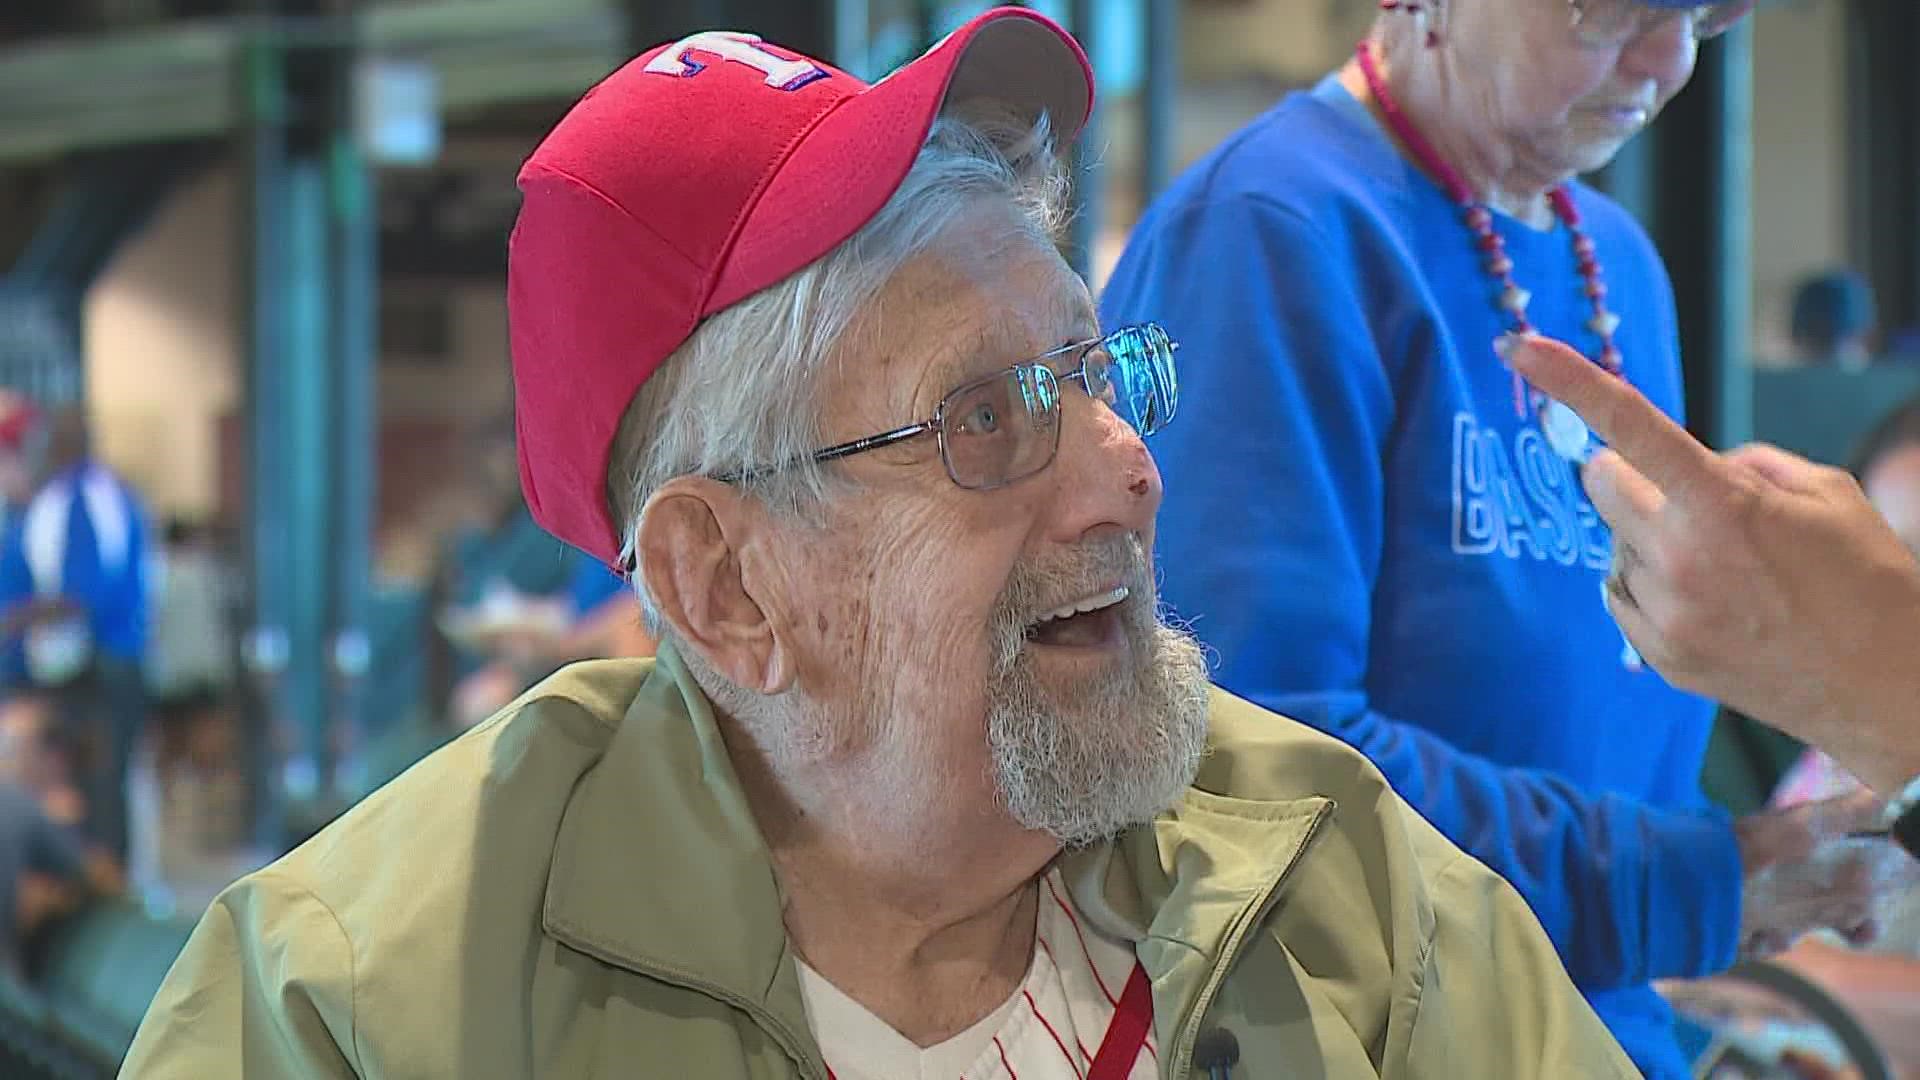 Louis Maidhof is in hospice with dementia, but that didn't stop him from taking in a game between the Texas Rangers and Minnesota Twins.